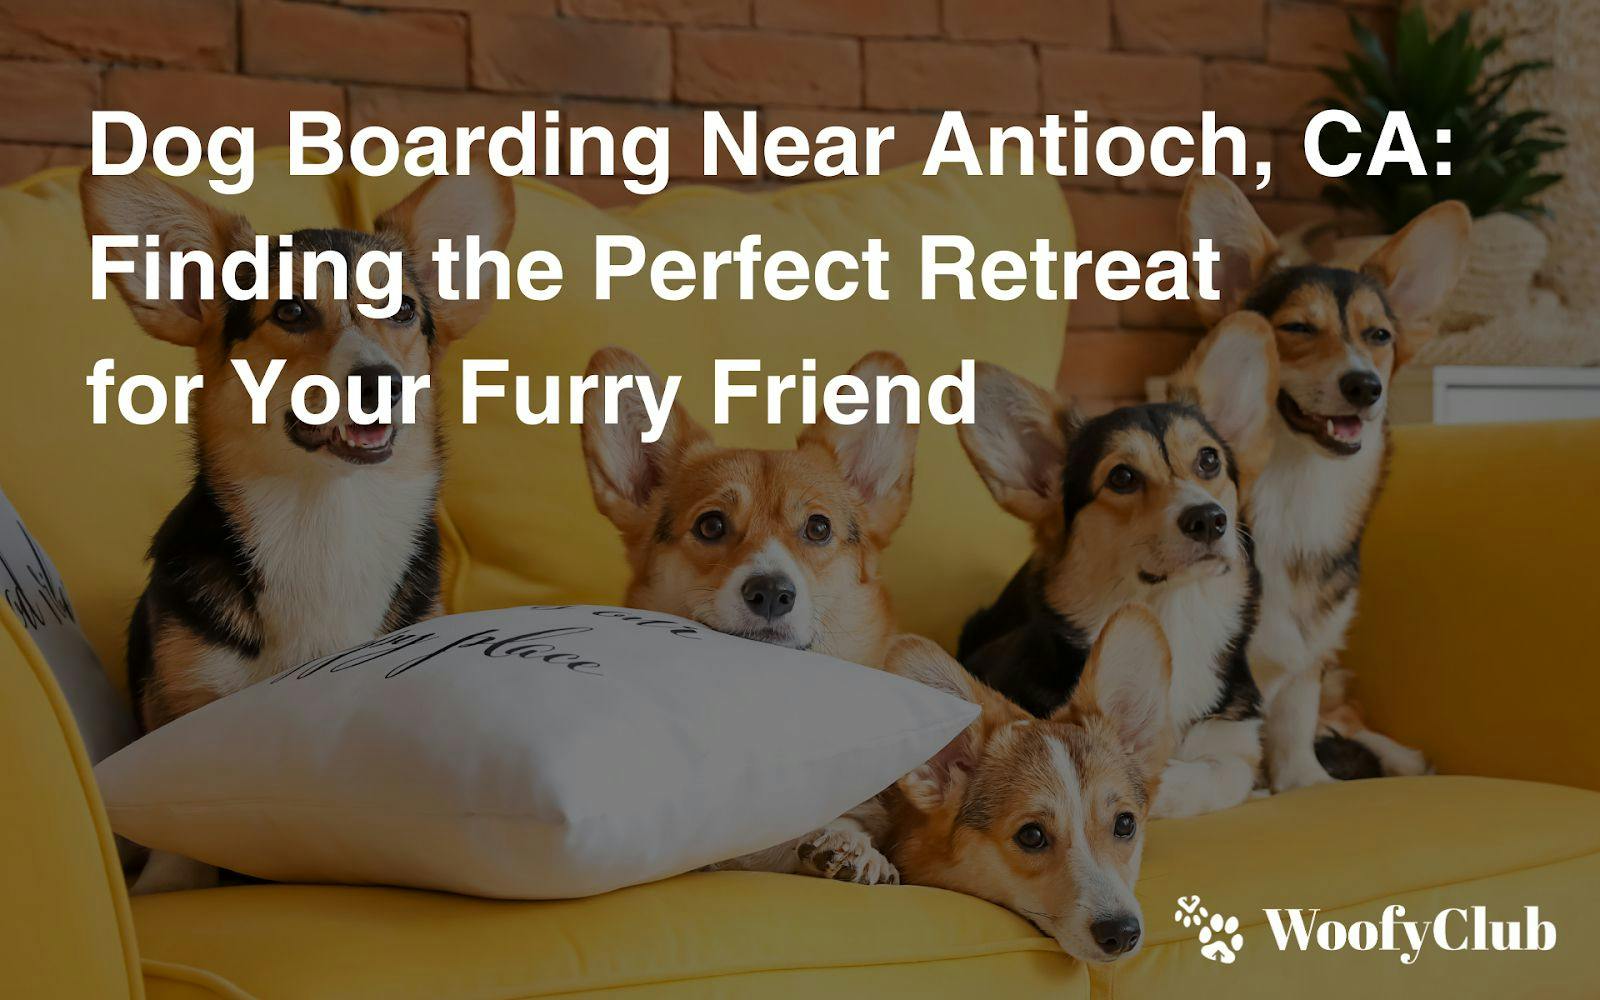 Dog Boarding Near Antioch, CA: Finding The Perfect Retreat For Your Furry Friend